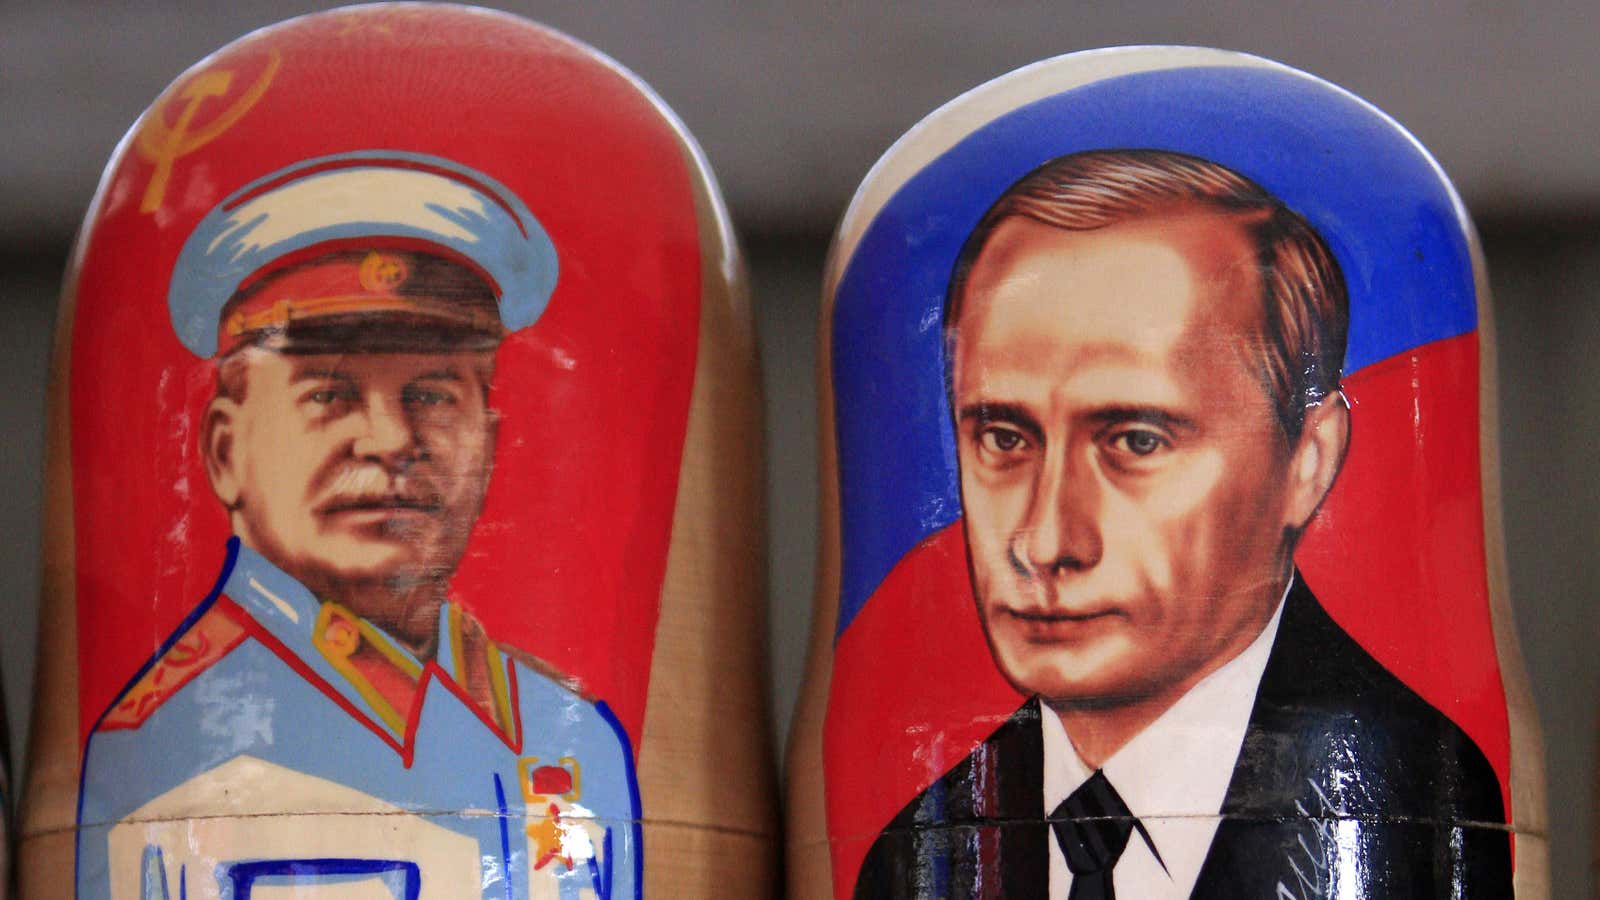 Stalin still edges Putin out in the eyes of the Russian people.